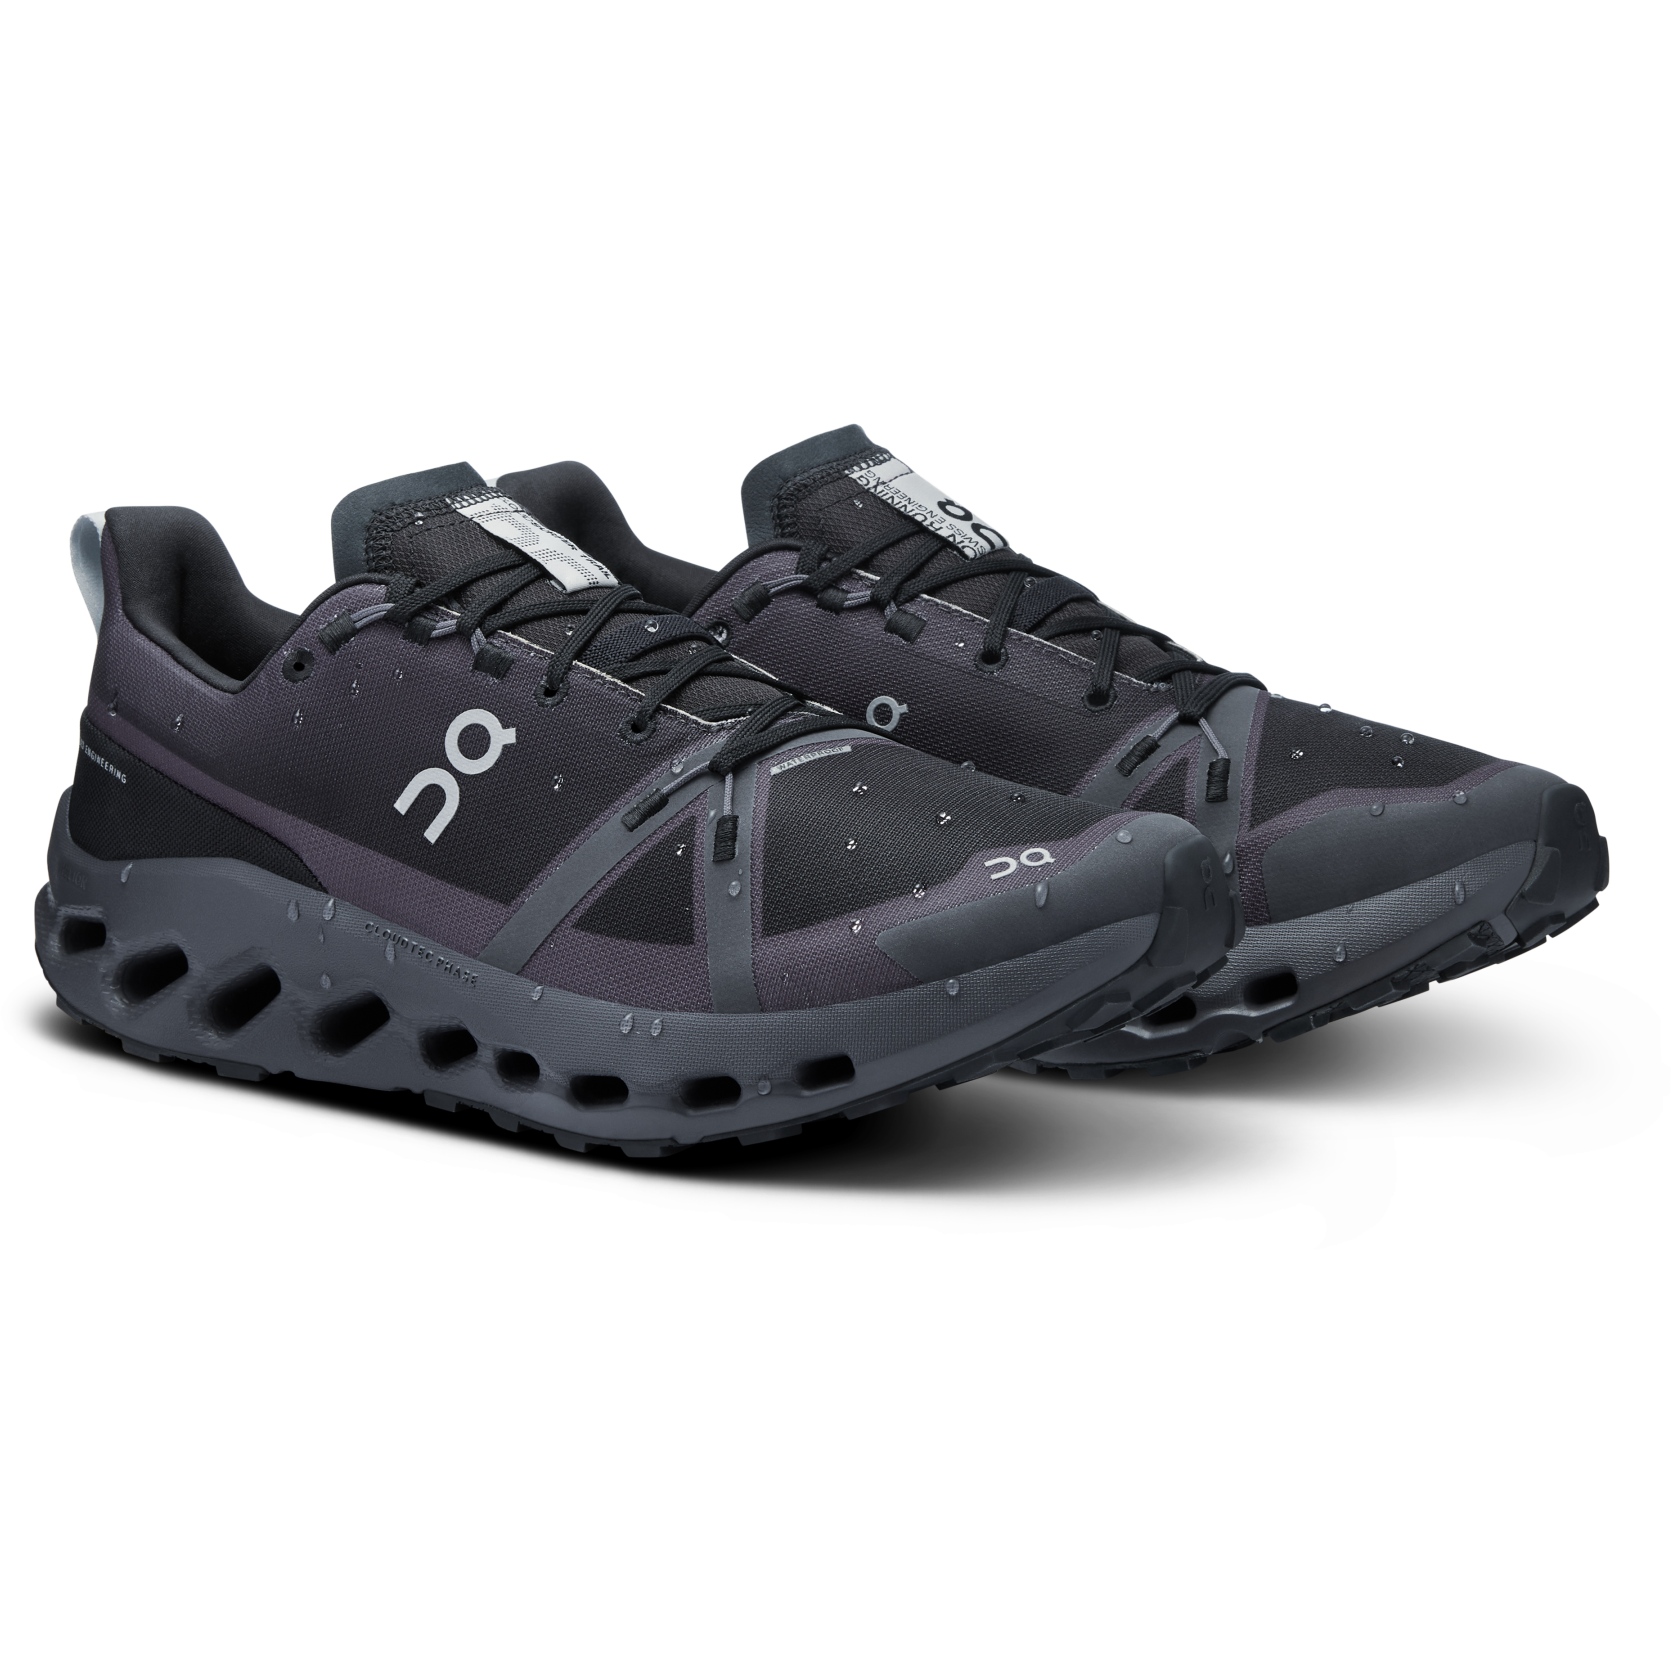 Picture of On Cloudsurfer Trail Waterproof Running Shoes - Black | Eclipse